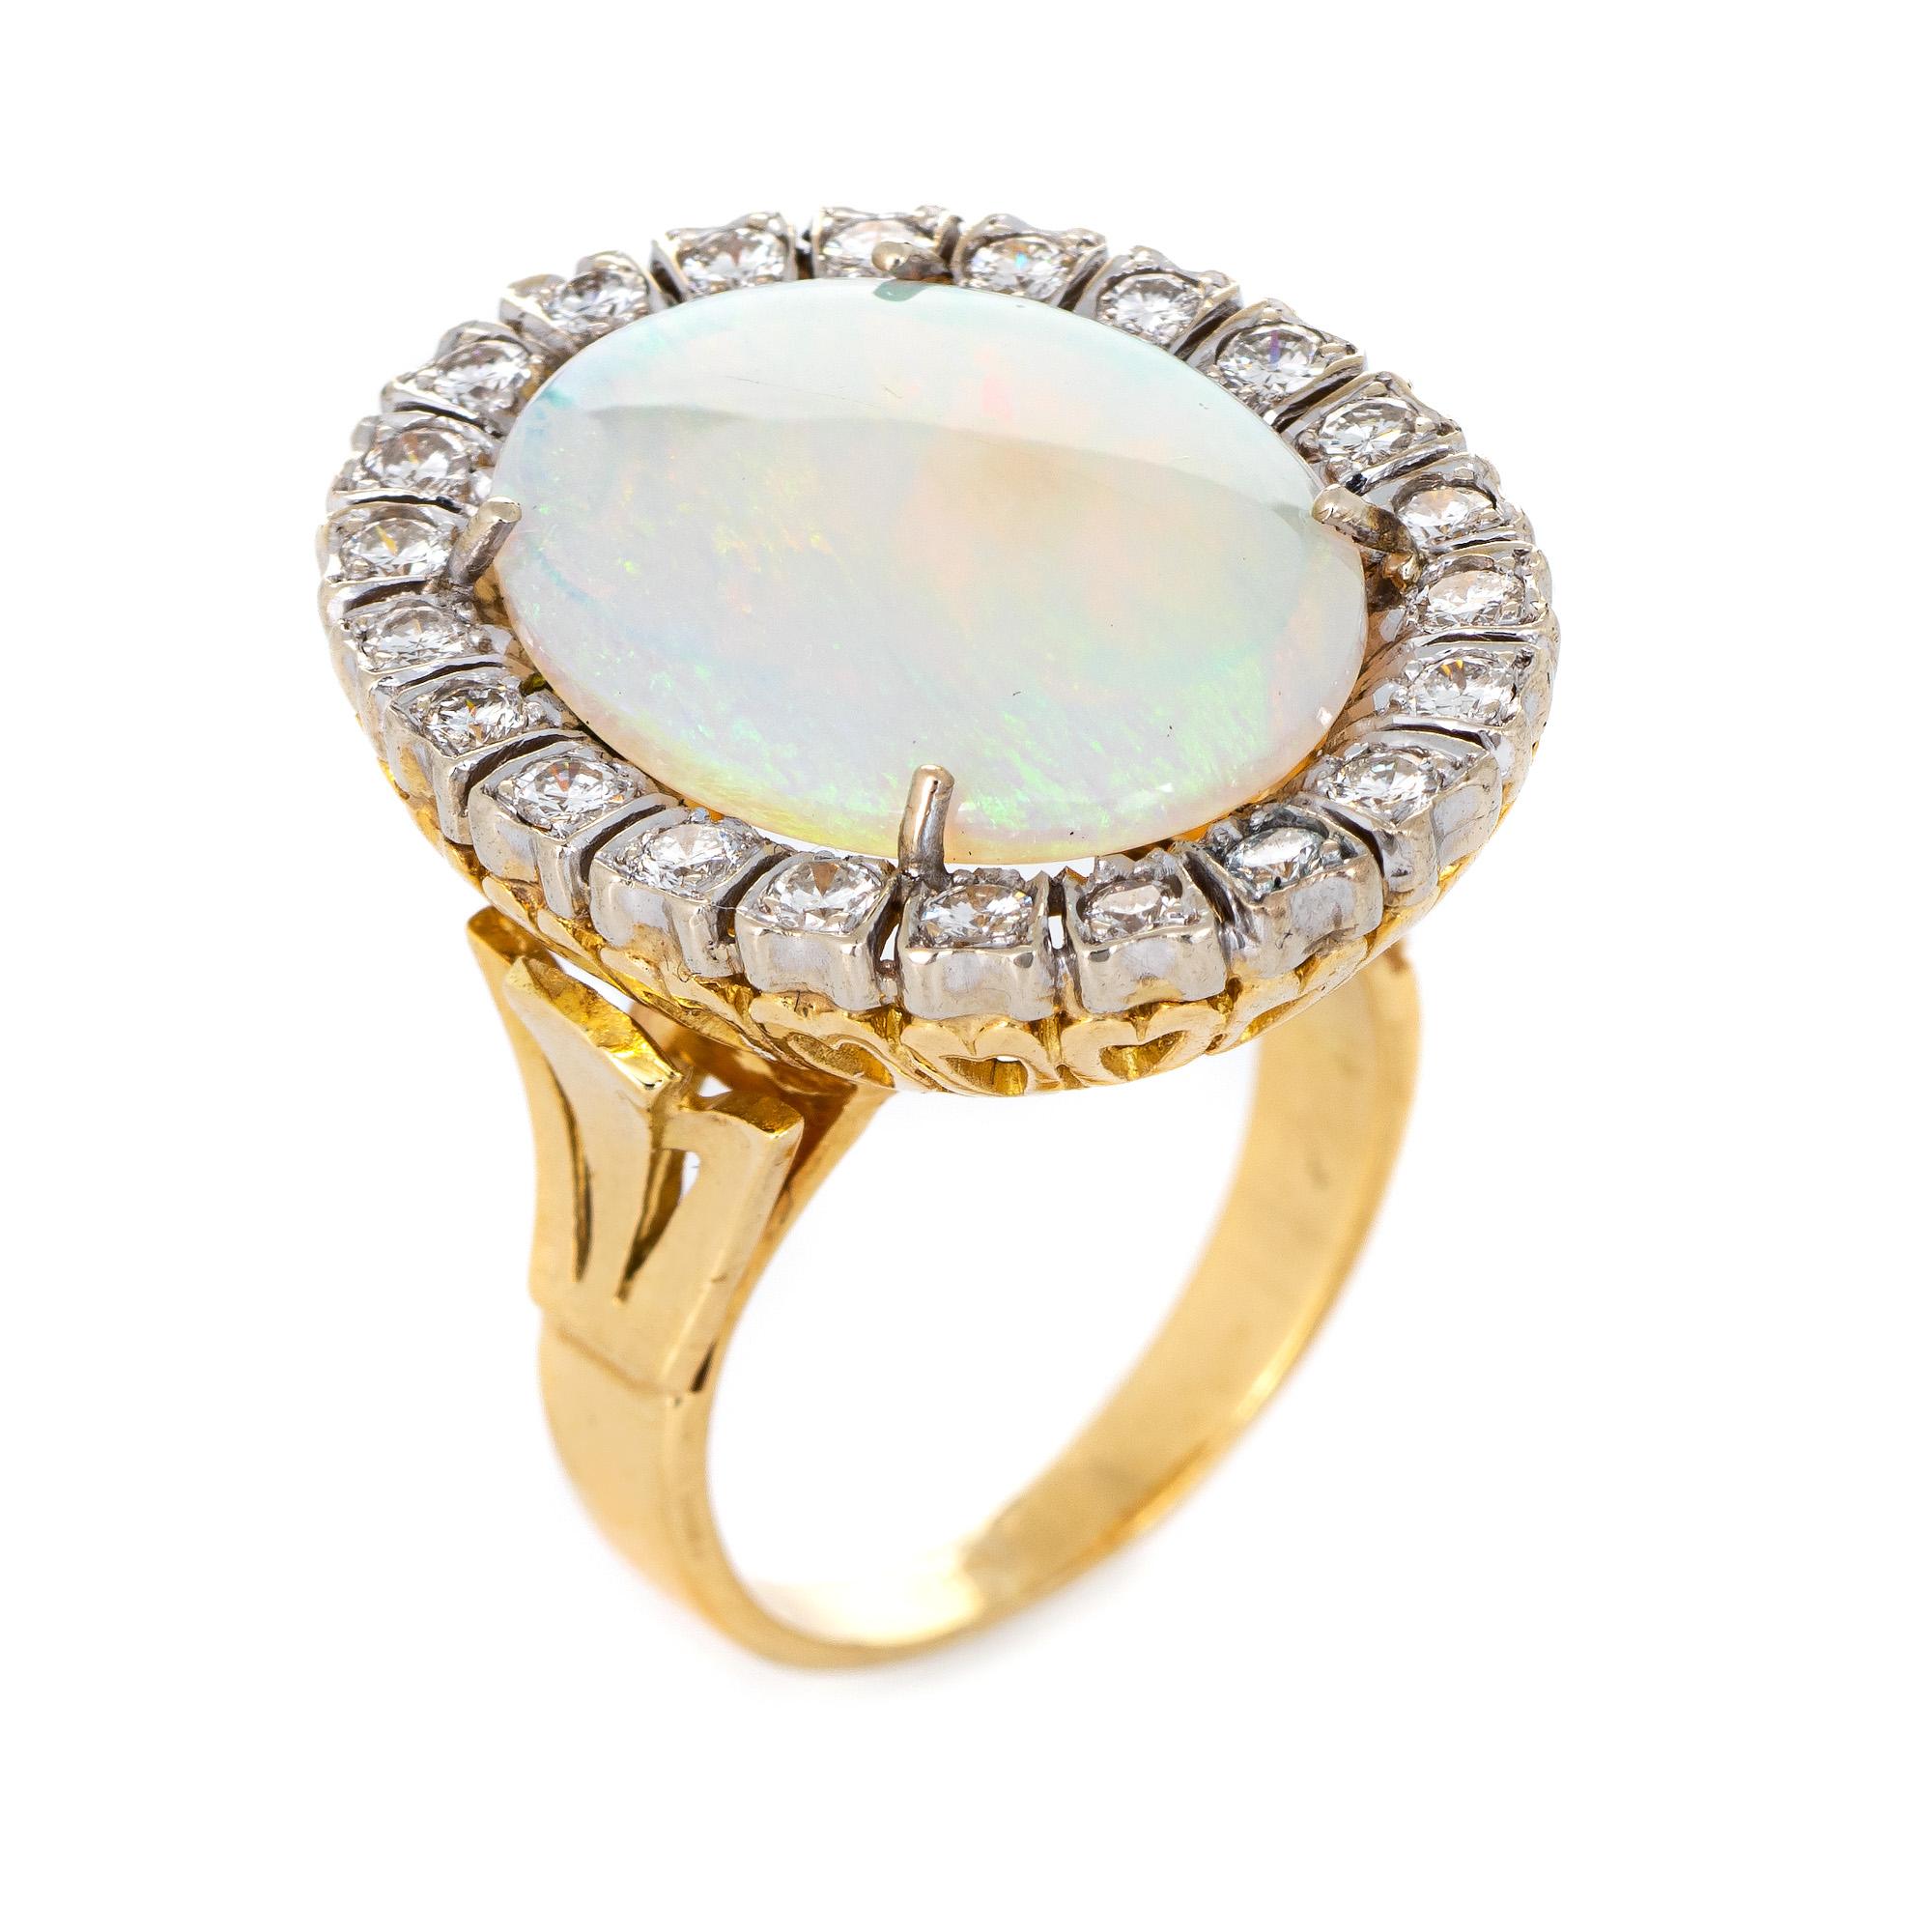 Stylish vintage opal & diamond cocktail ring (circa 1970s to 1980s) crafted in 18 karat yellow gold. 

Natural opal measures 20mm x 15mm (estimated at 21 carats), accented with 21 estimated 0.07 carat round brilliant cut diamonds. The total diamond